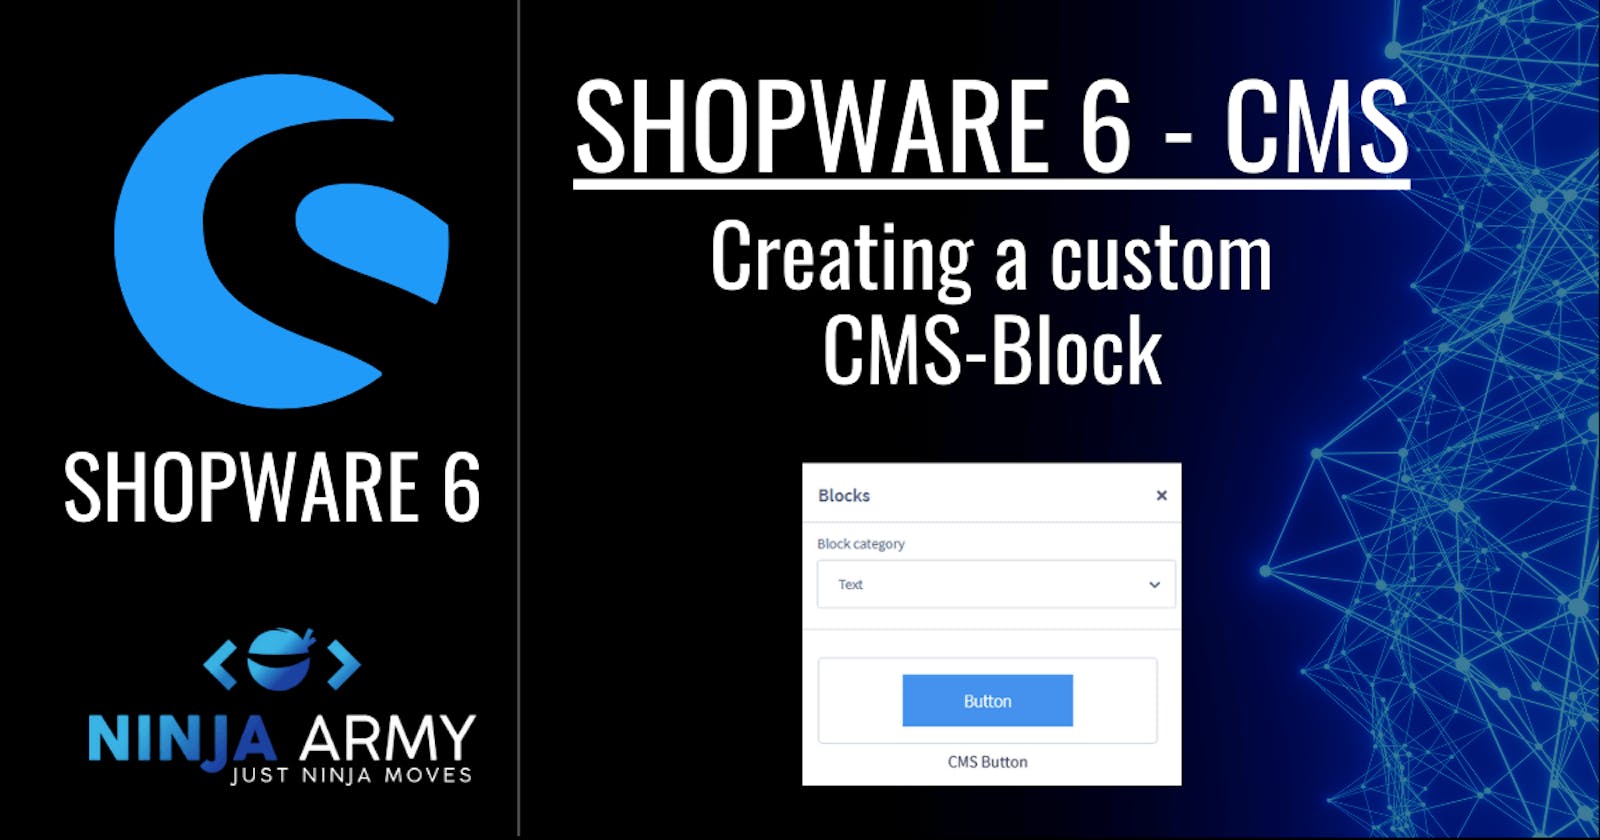 How to create a CMS-Block in Shopware 6